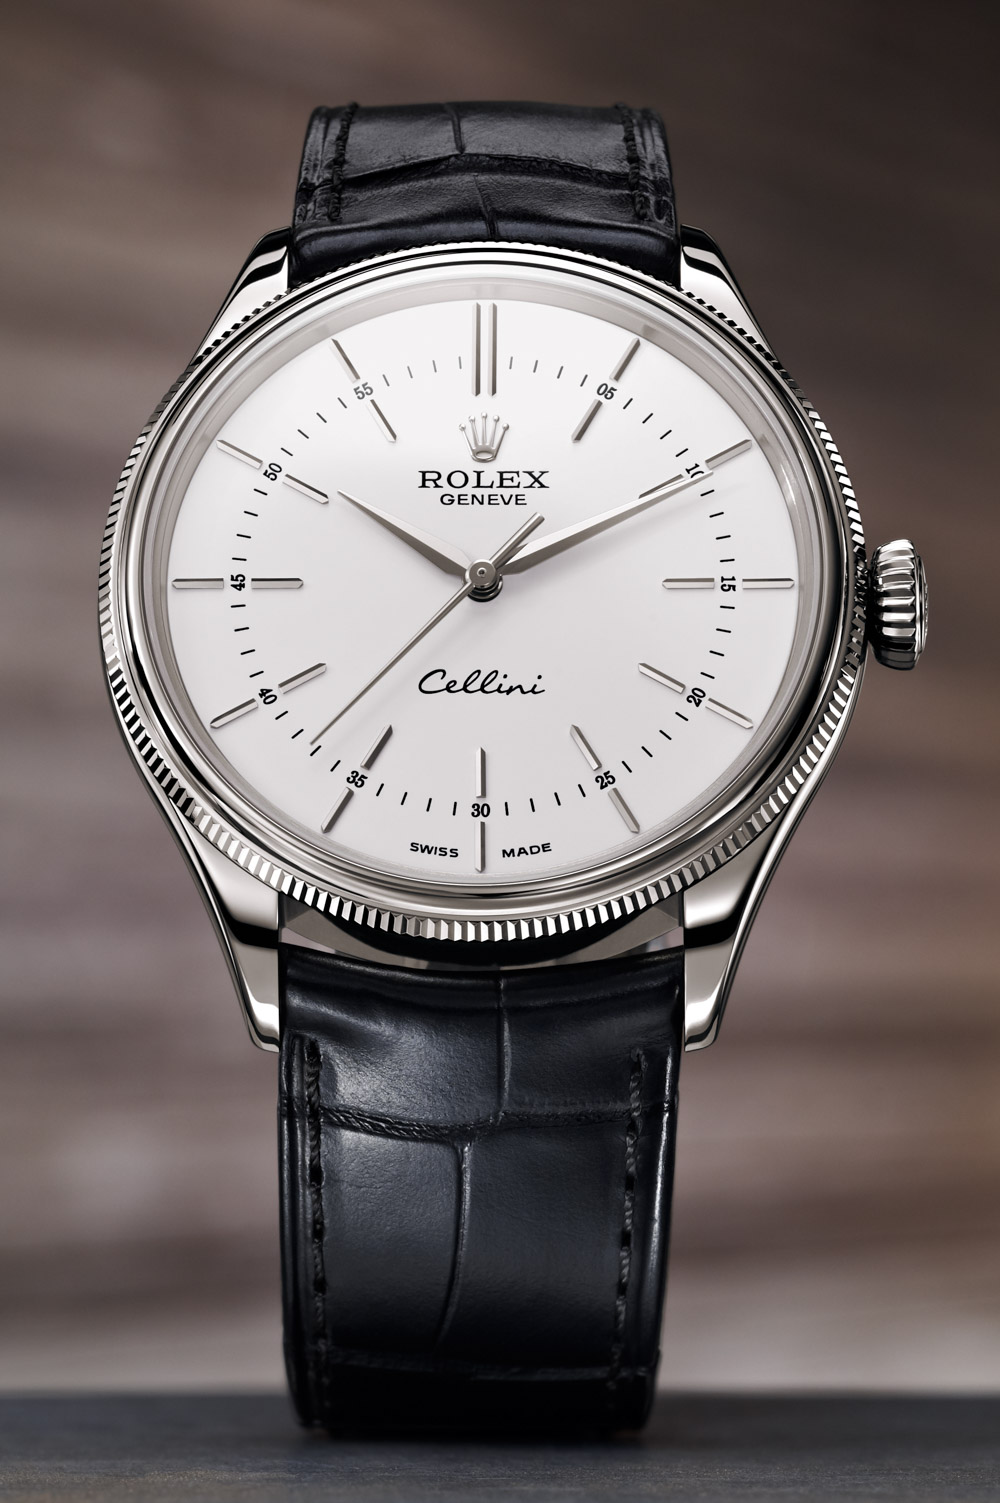 Bage smal Udløbet Rolex Cellini Time Watch For 2016 With 'Clean Dial' Hands-On | aBlogtoWatch